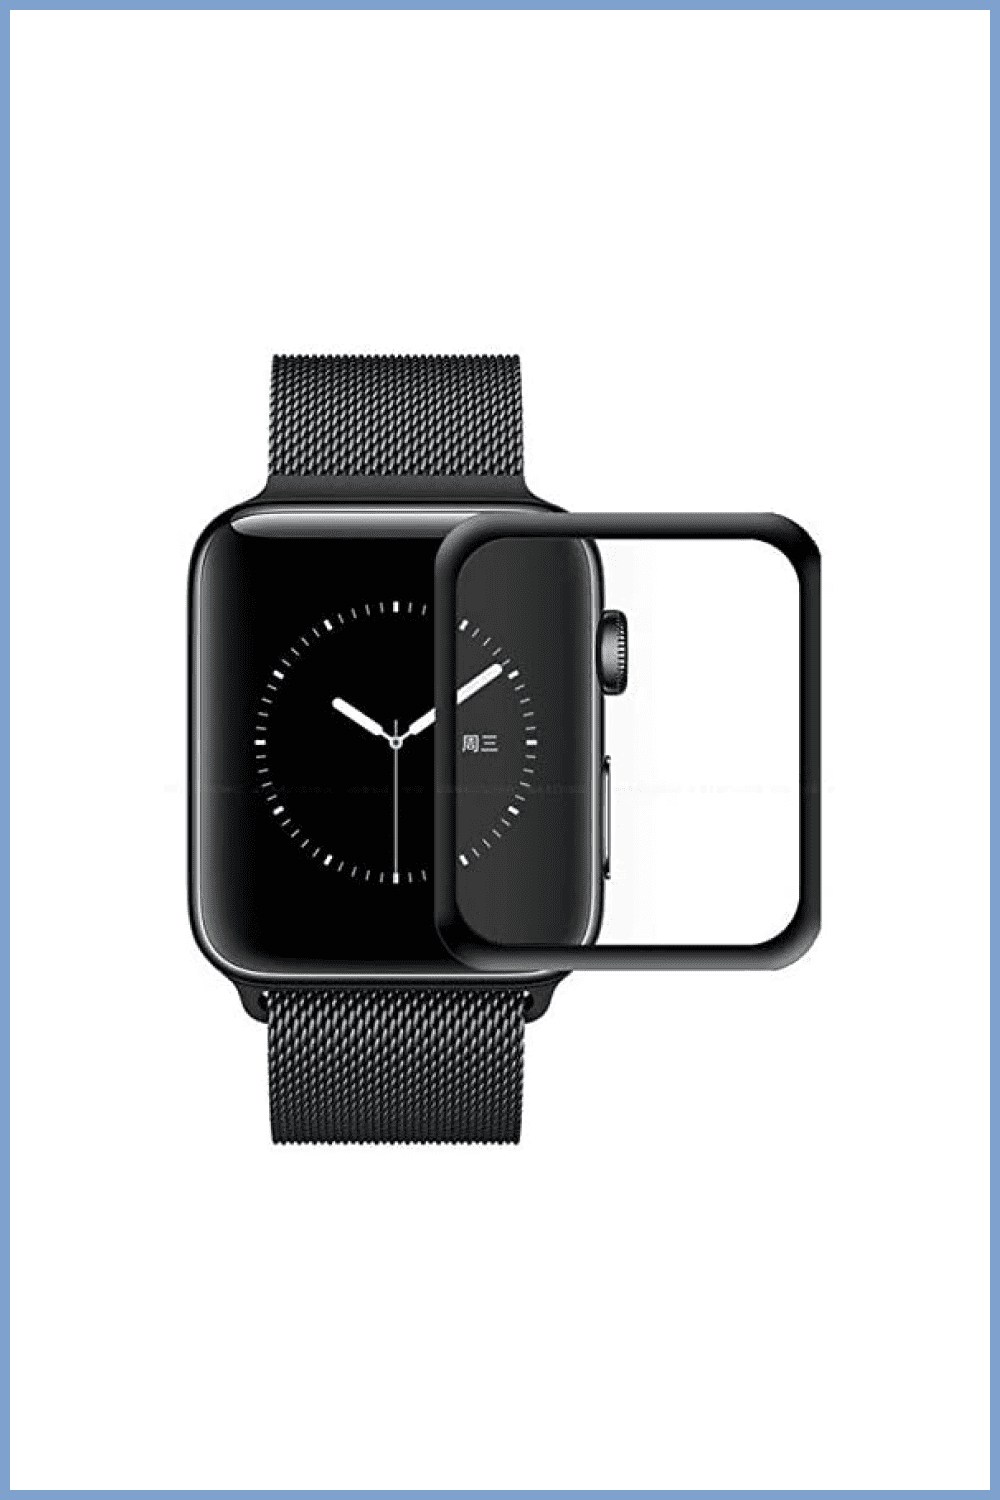 Full Cover Glass Screen Protector for Apple Watches.